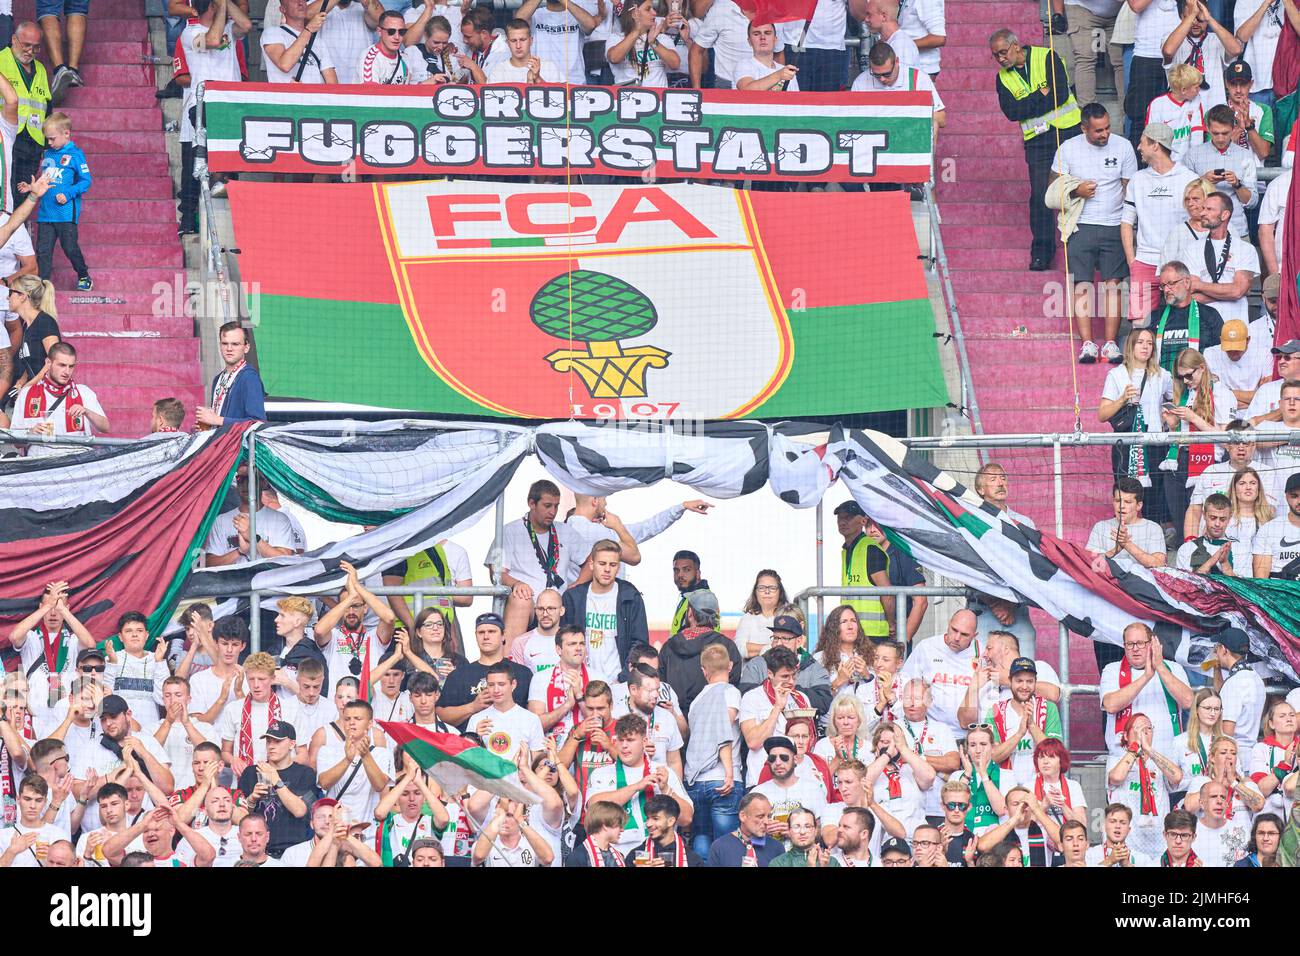 FCA fans in the match FC AUGSBURG - SC FREIBURG 0-4 1.German Football League on Aug 06, 2022 in Augsburg, Germany. Season 2022/2023, matchday 1, 1.Bundesliga, FCB, Munich, 1.Spieltag © Peter Schatz / Alamy Live News    - DFL REGULATIONS PROHIBIT ANY USE OF PHOTOGRAPHS as IMAGE SEQUENCES and/or QUASI-VIDEO - Stock Photo